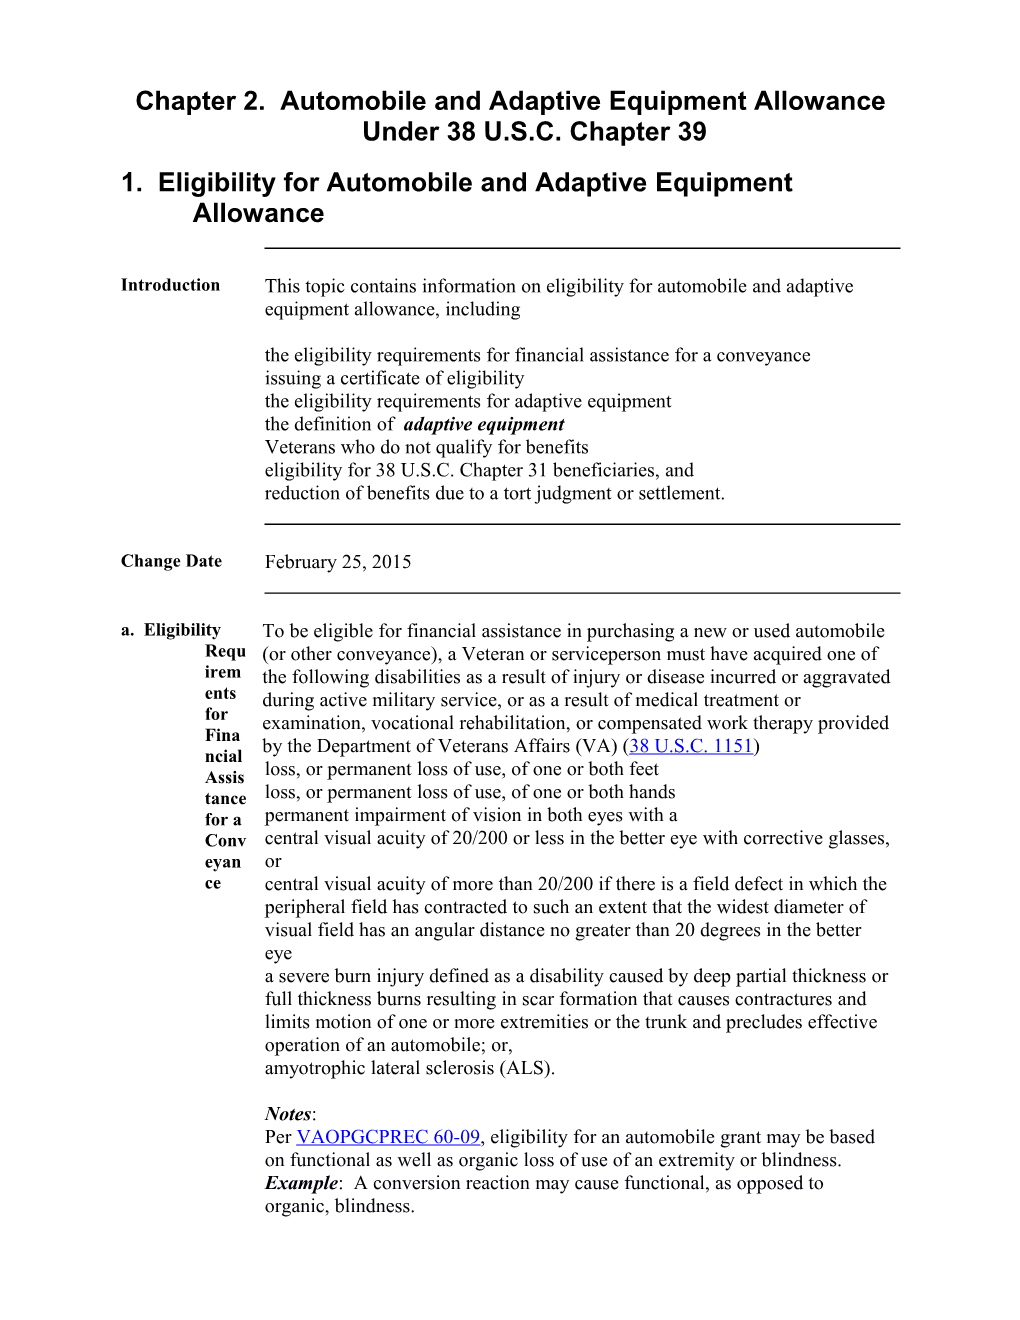 Chapter 2. Automobile and Adaptive Equipment Allowance Under 38 U.S.C. Chapter 39 (U.S